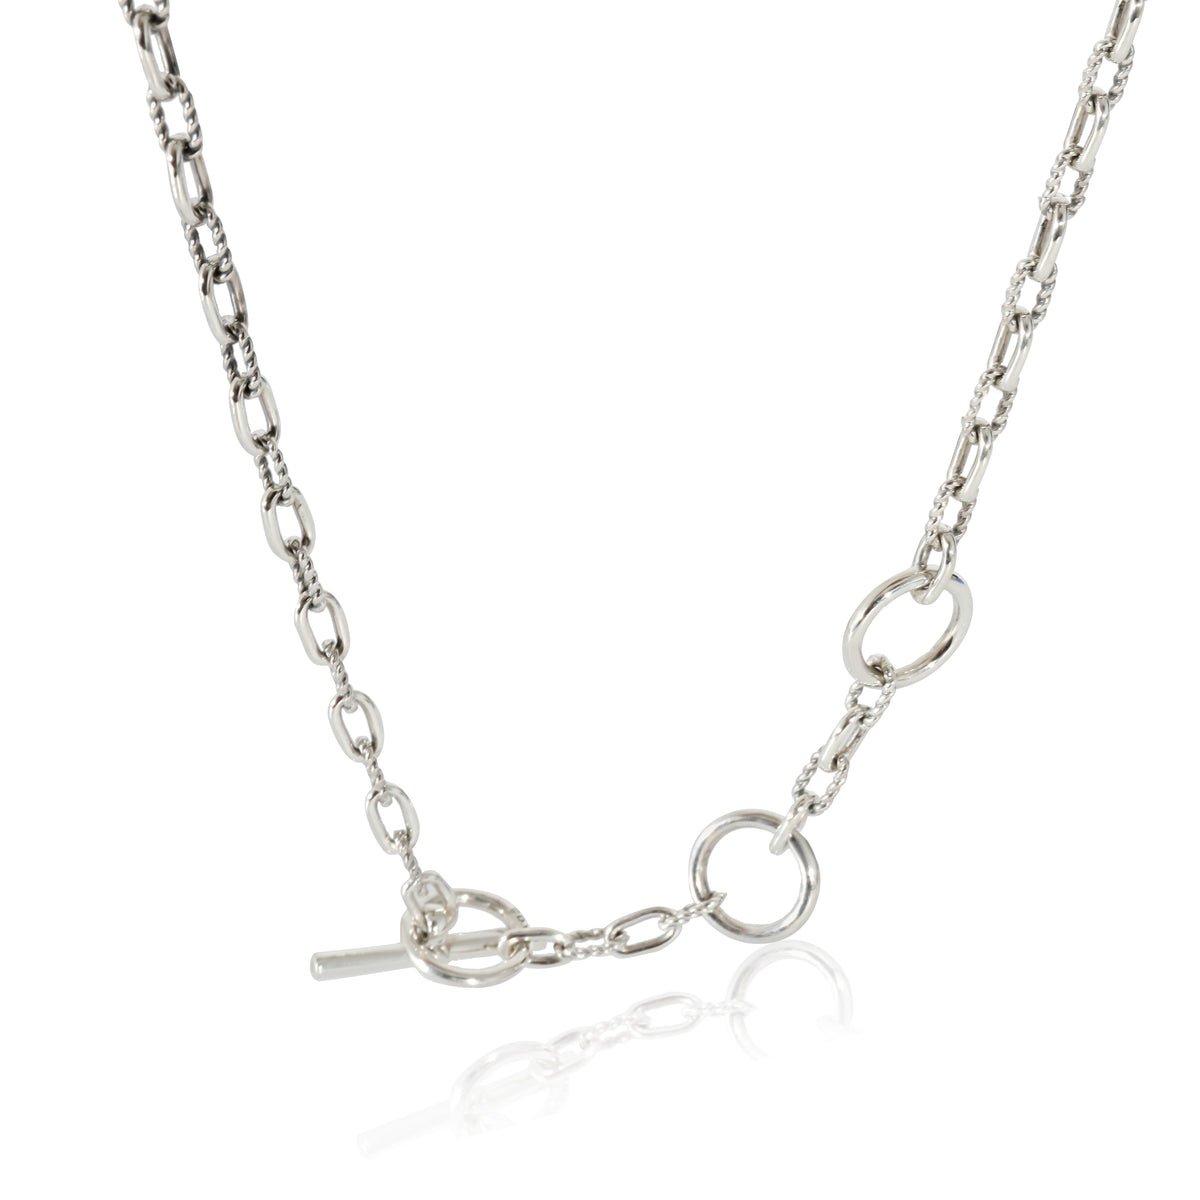 David Yurman Madison Necklace in Sterling Silver